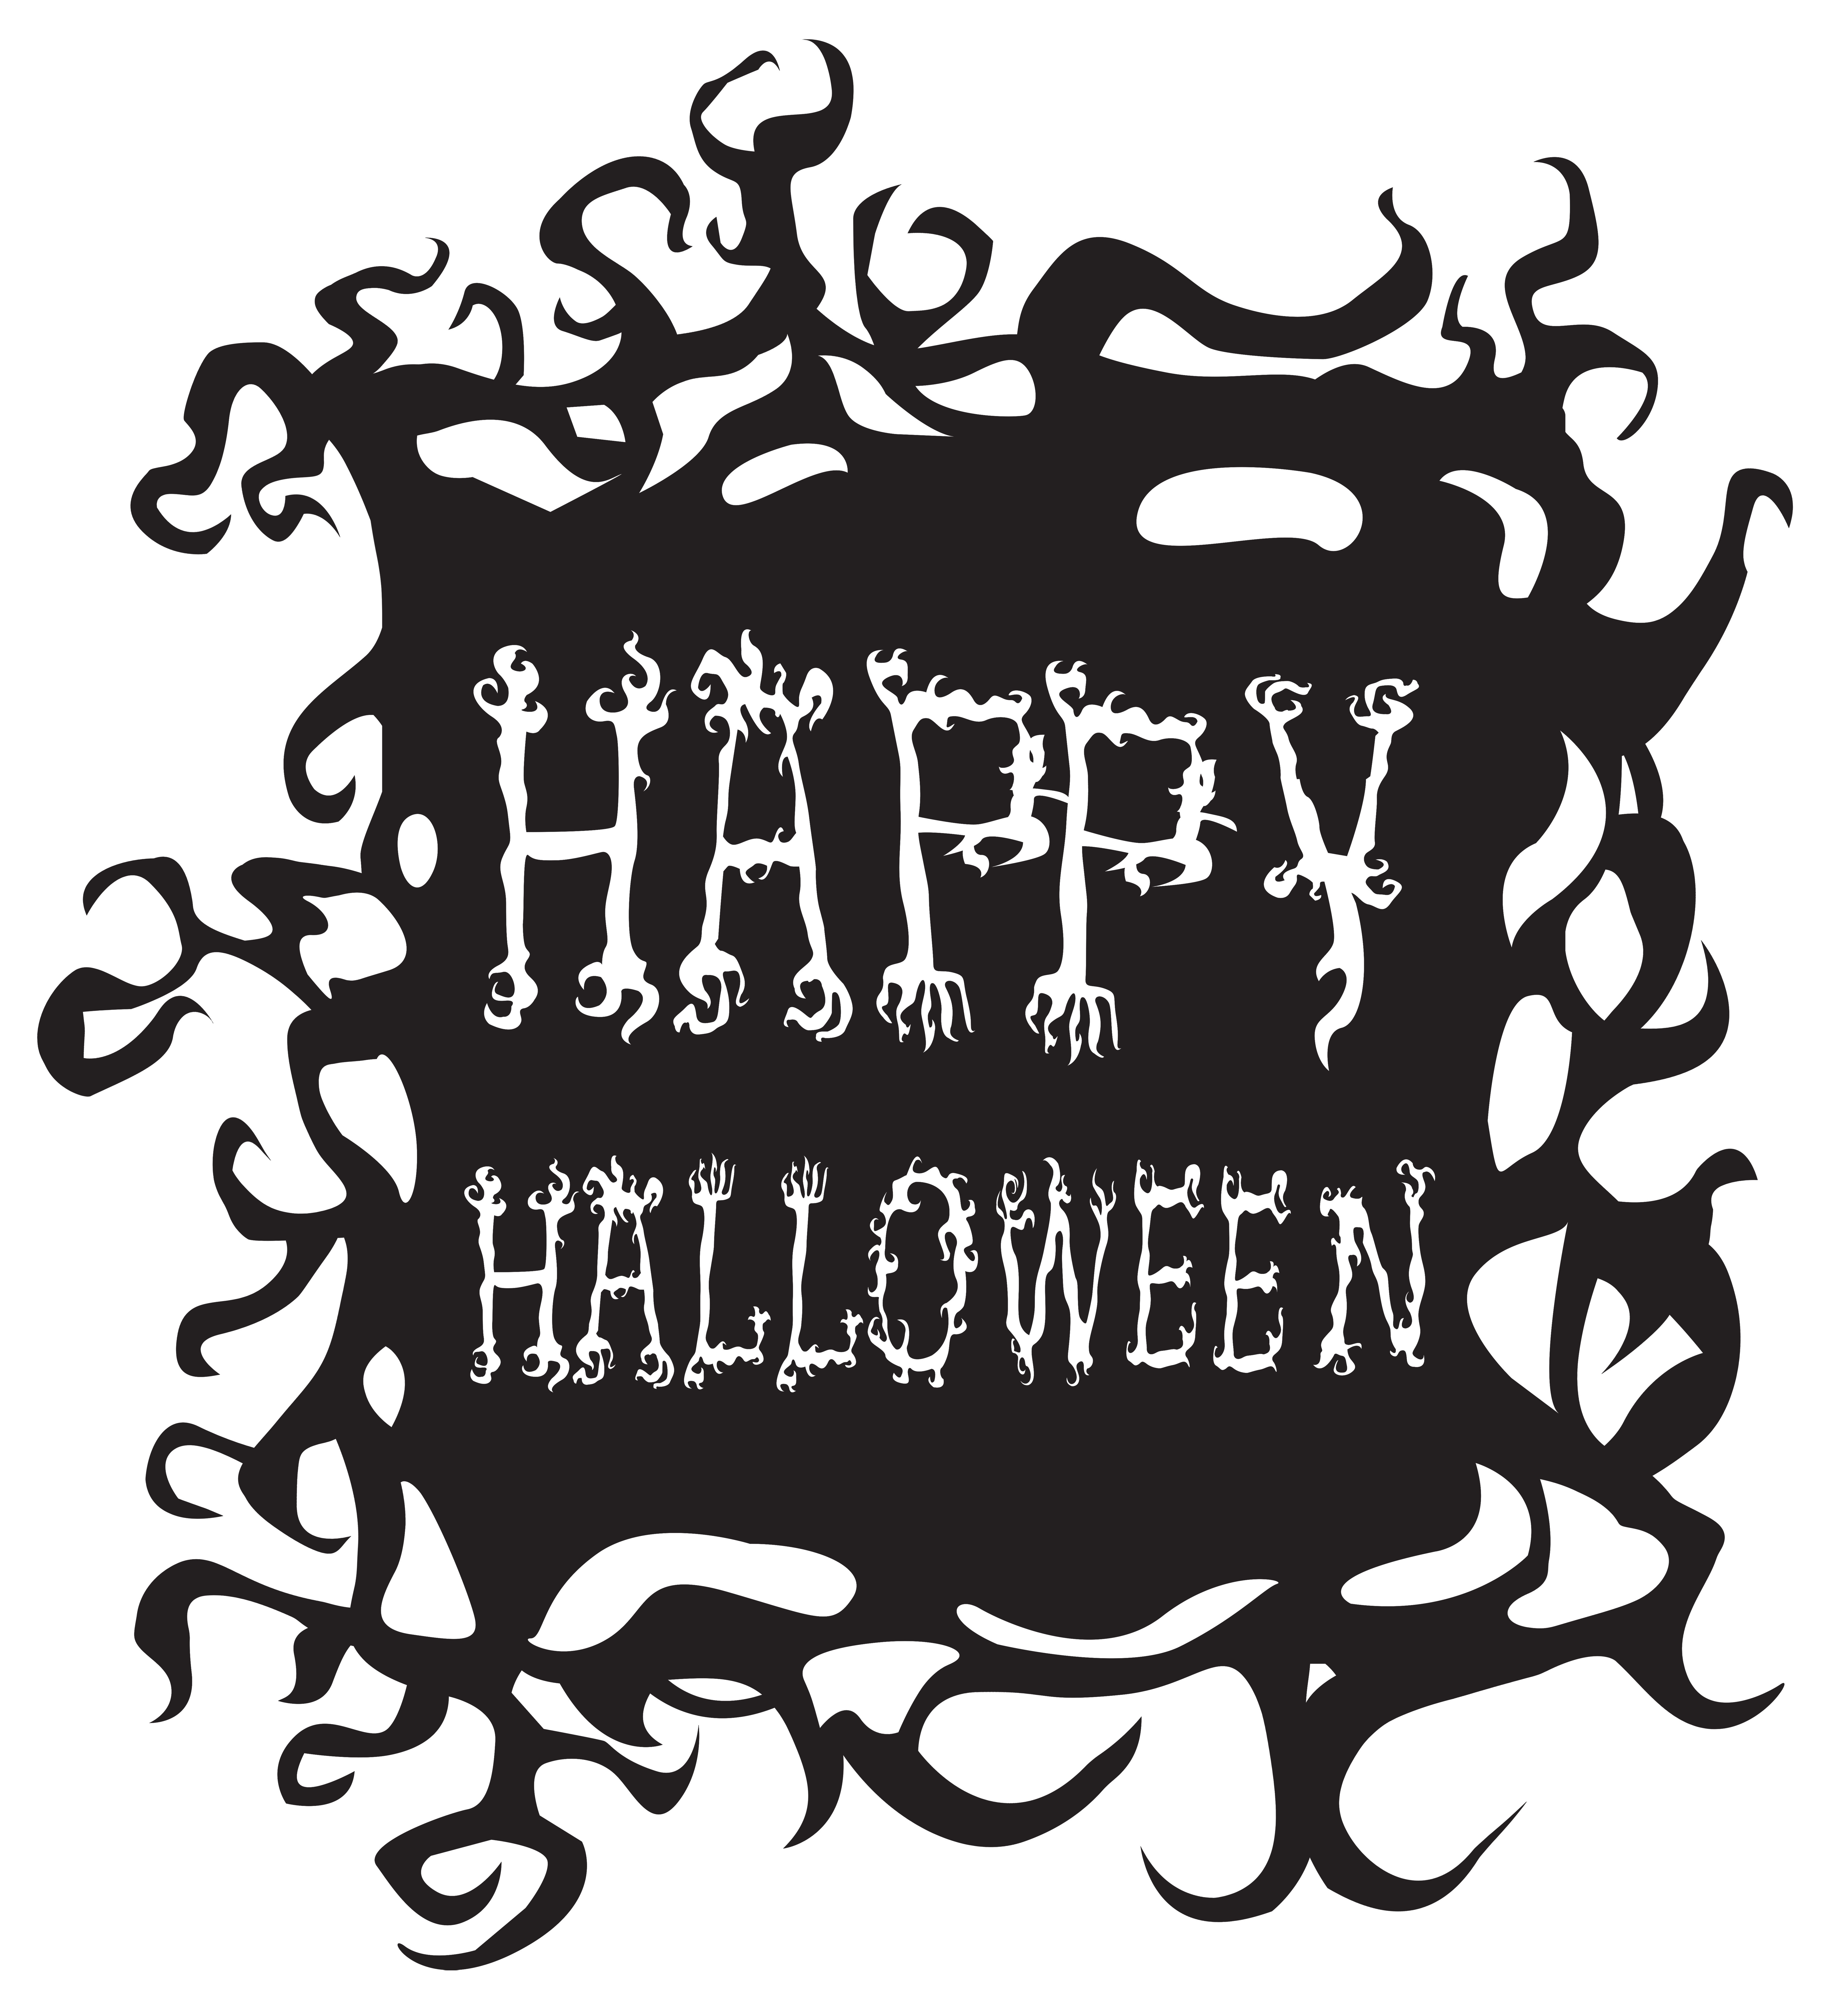 Happy Halloween PNG Free Clip Art Image Quality Image And Transparent PNG Free Clipart